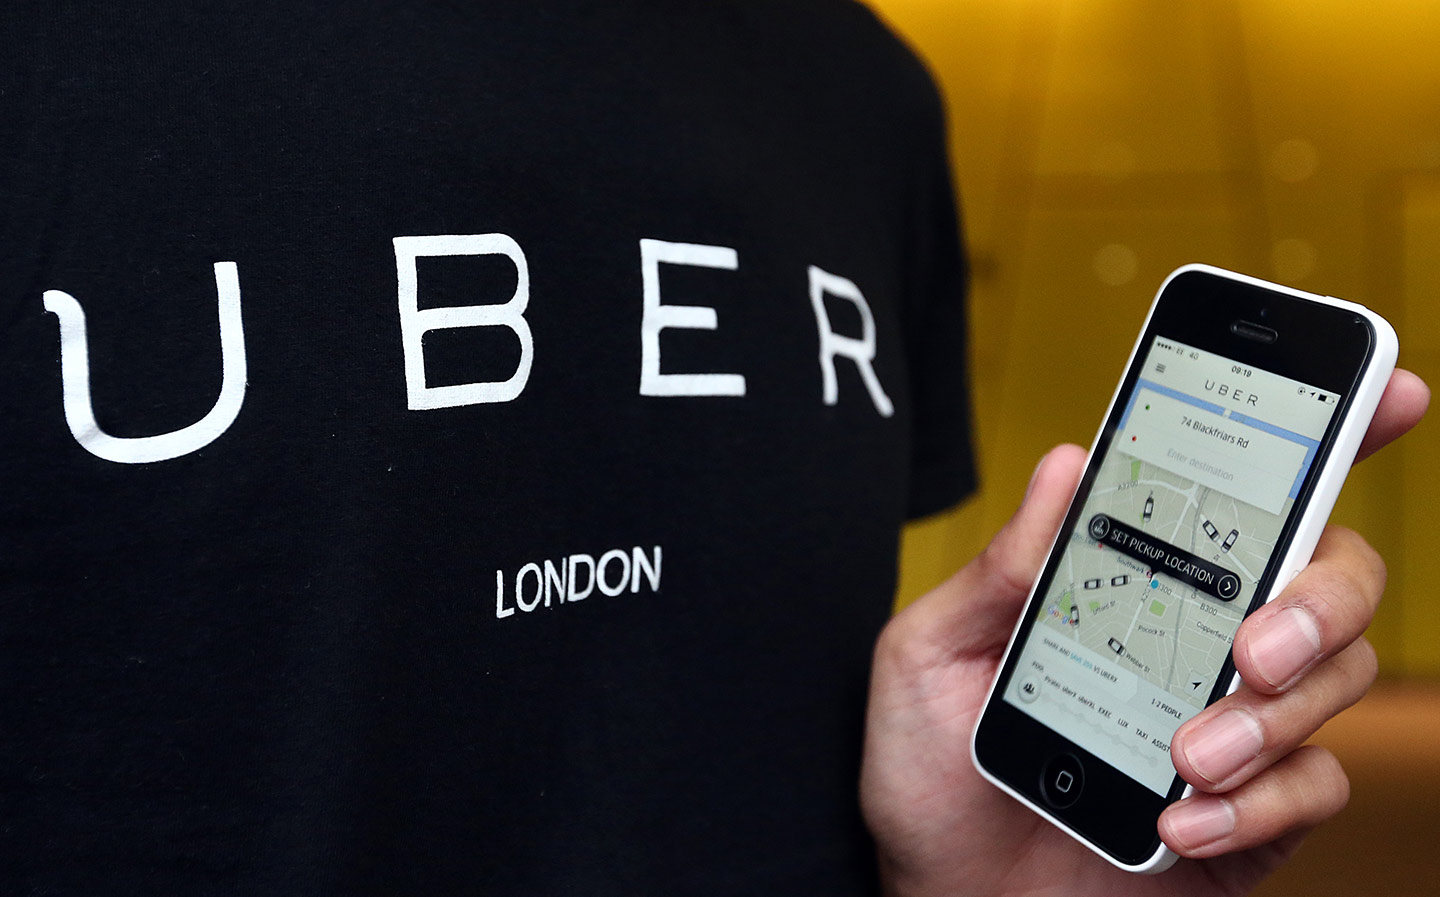 Female Uber passenger charged £119 for eight-mile journey after 43-mile round trip while she slept